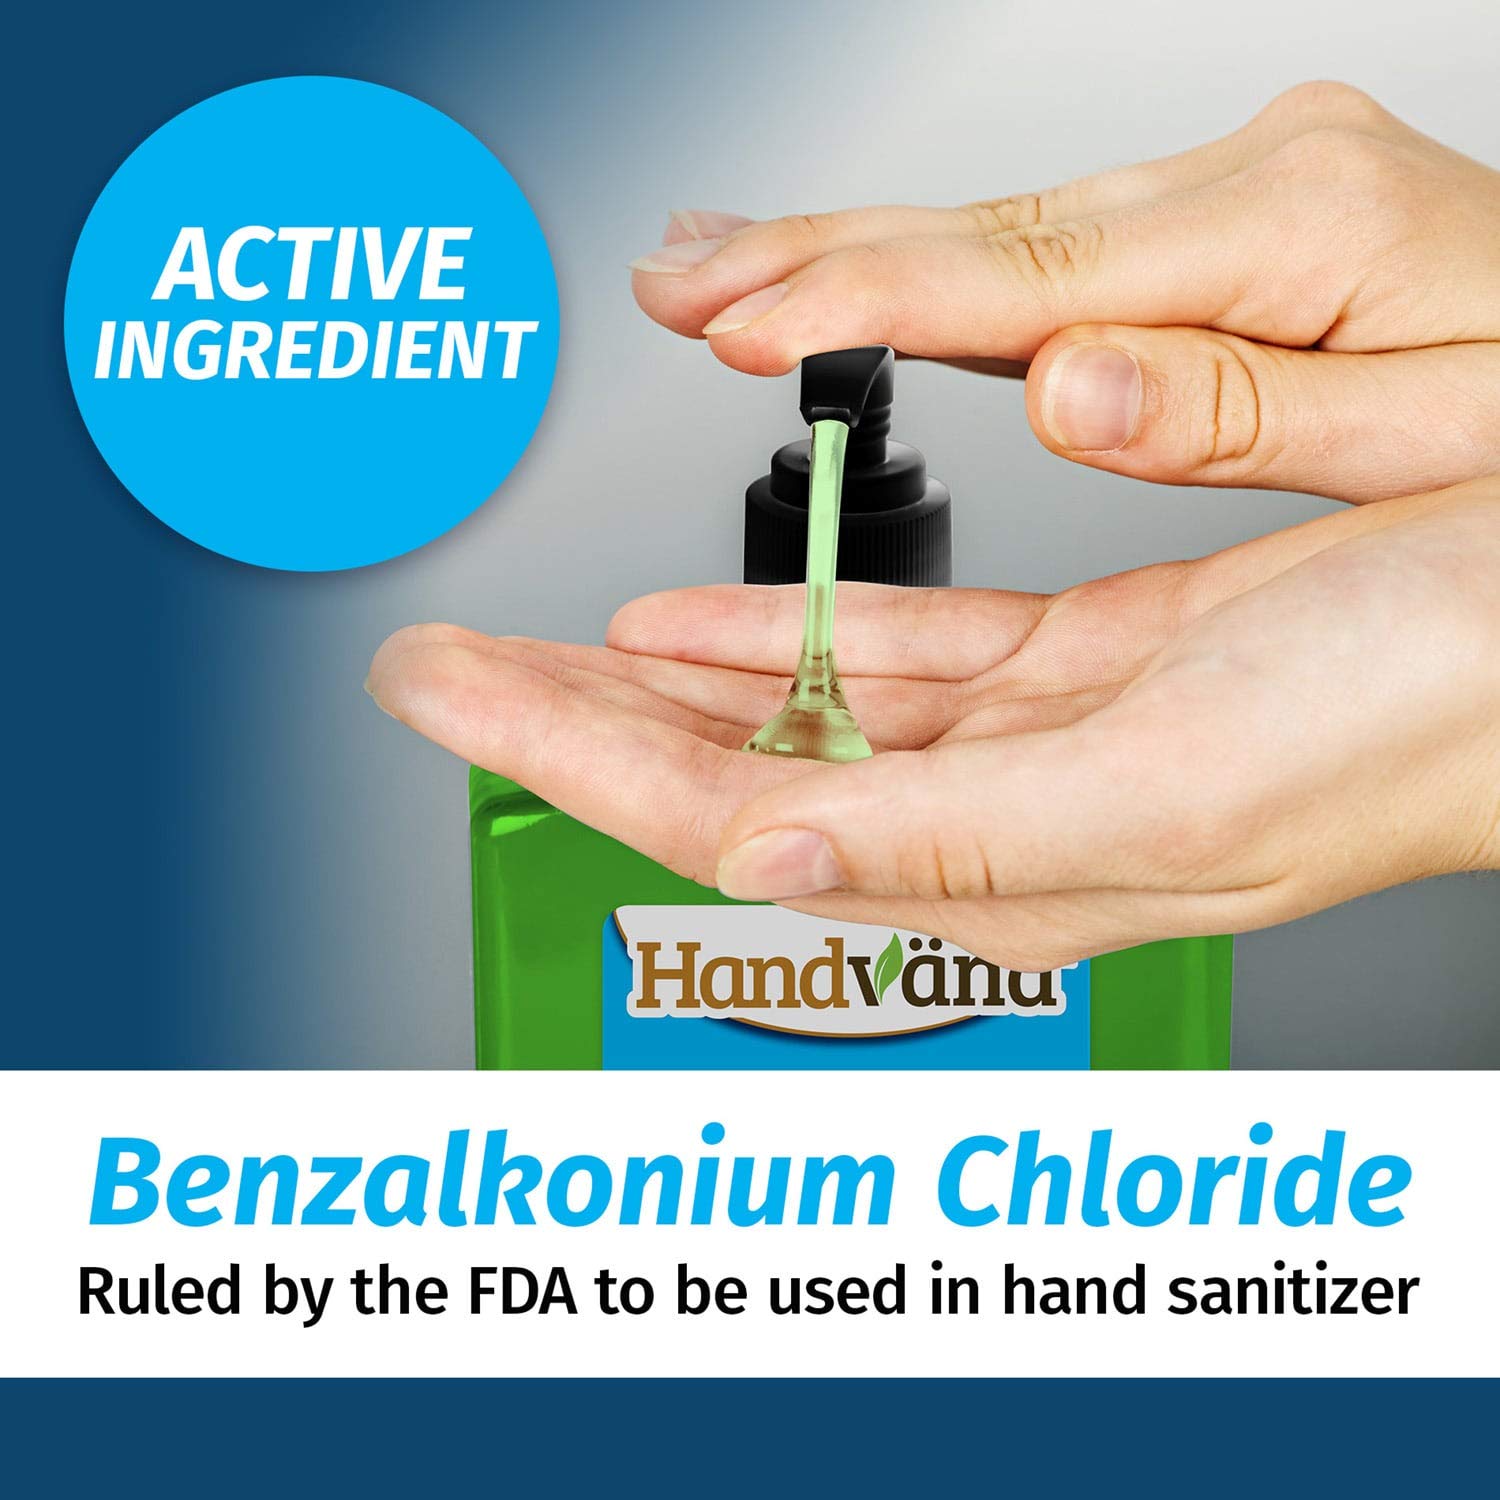 Hands pumping Handvana HydroClean Gel Hand Sanitizer onto his hands. Active ingredient is Benzalkonium Chloride which is ruled by the FDA to be used in hand sanitizer